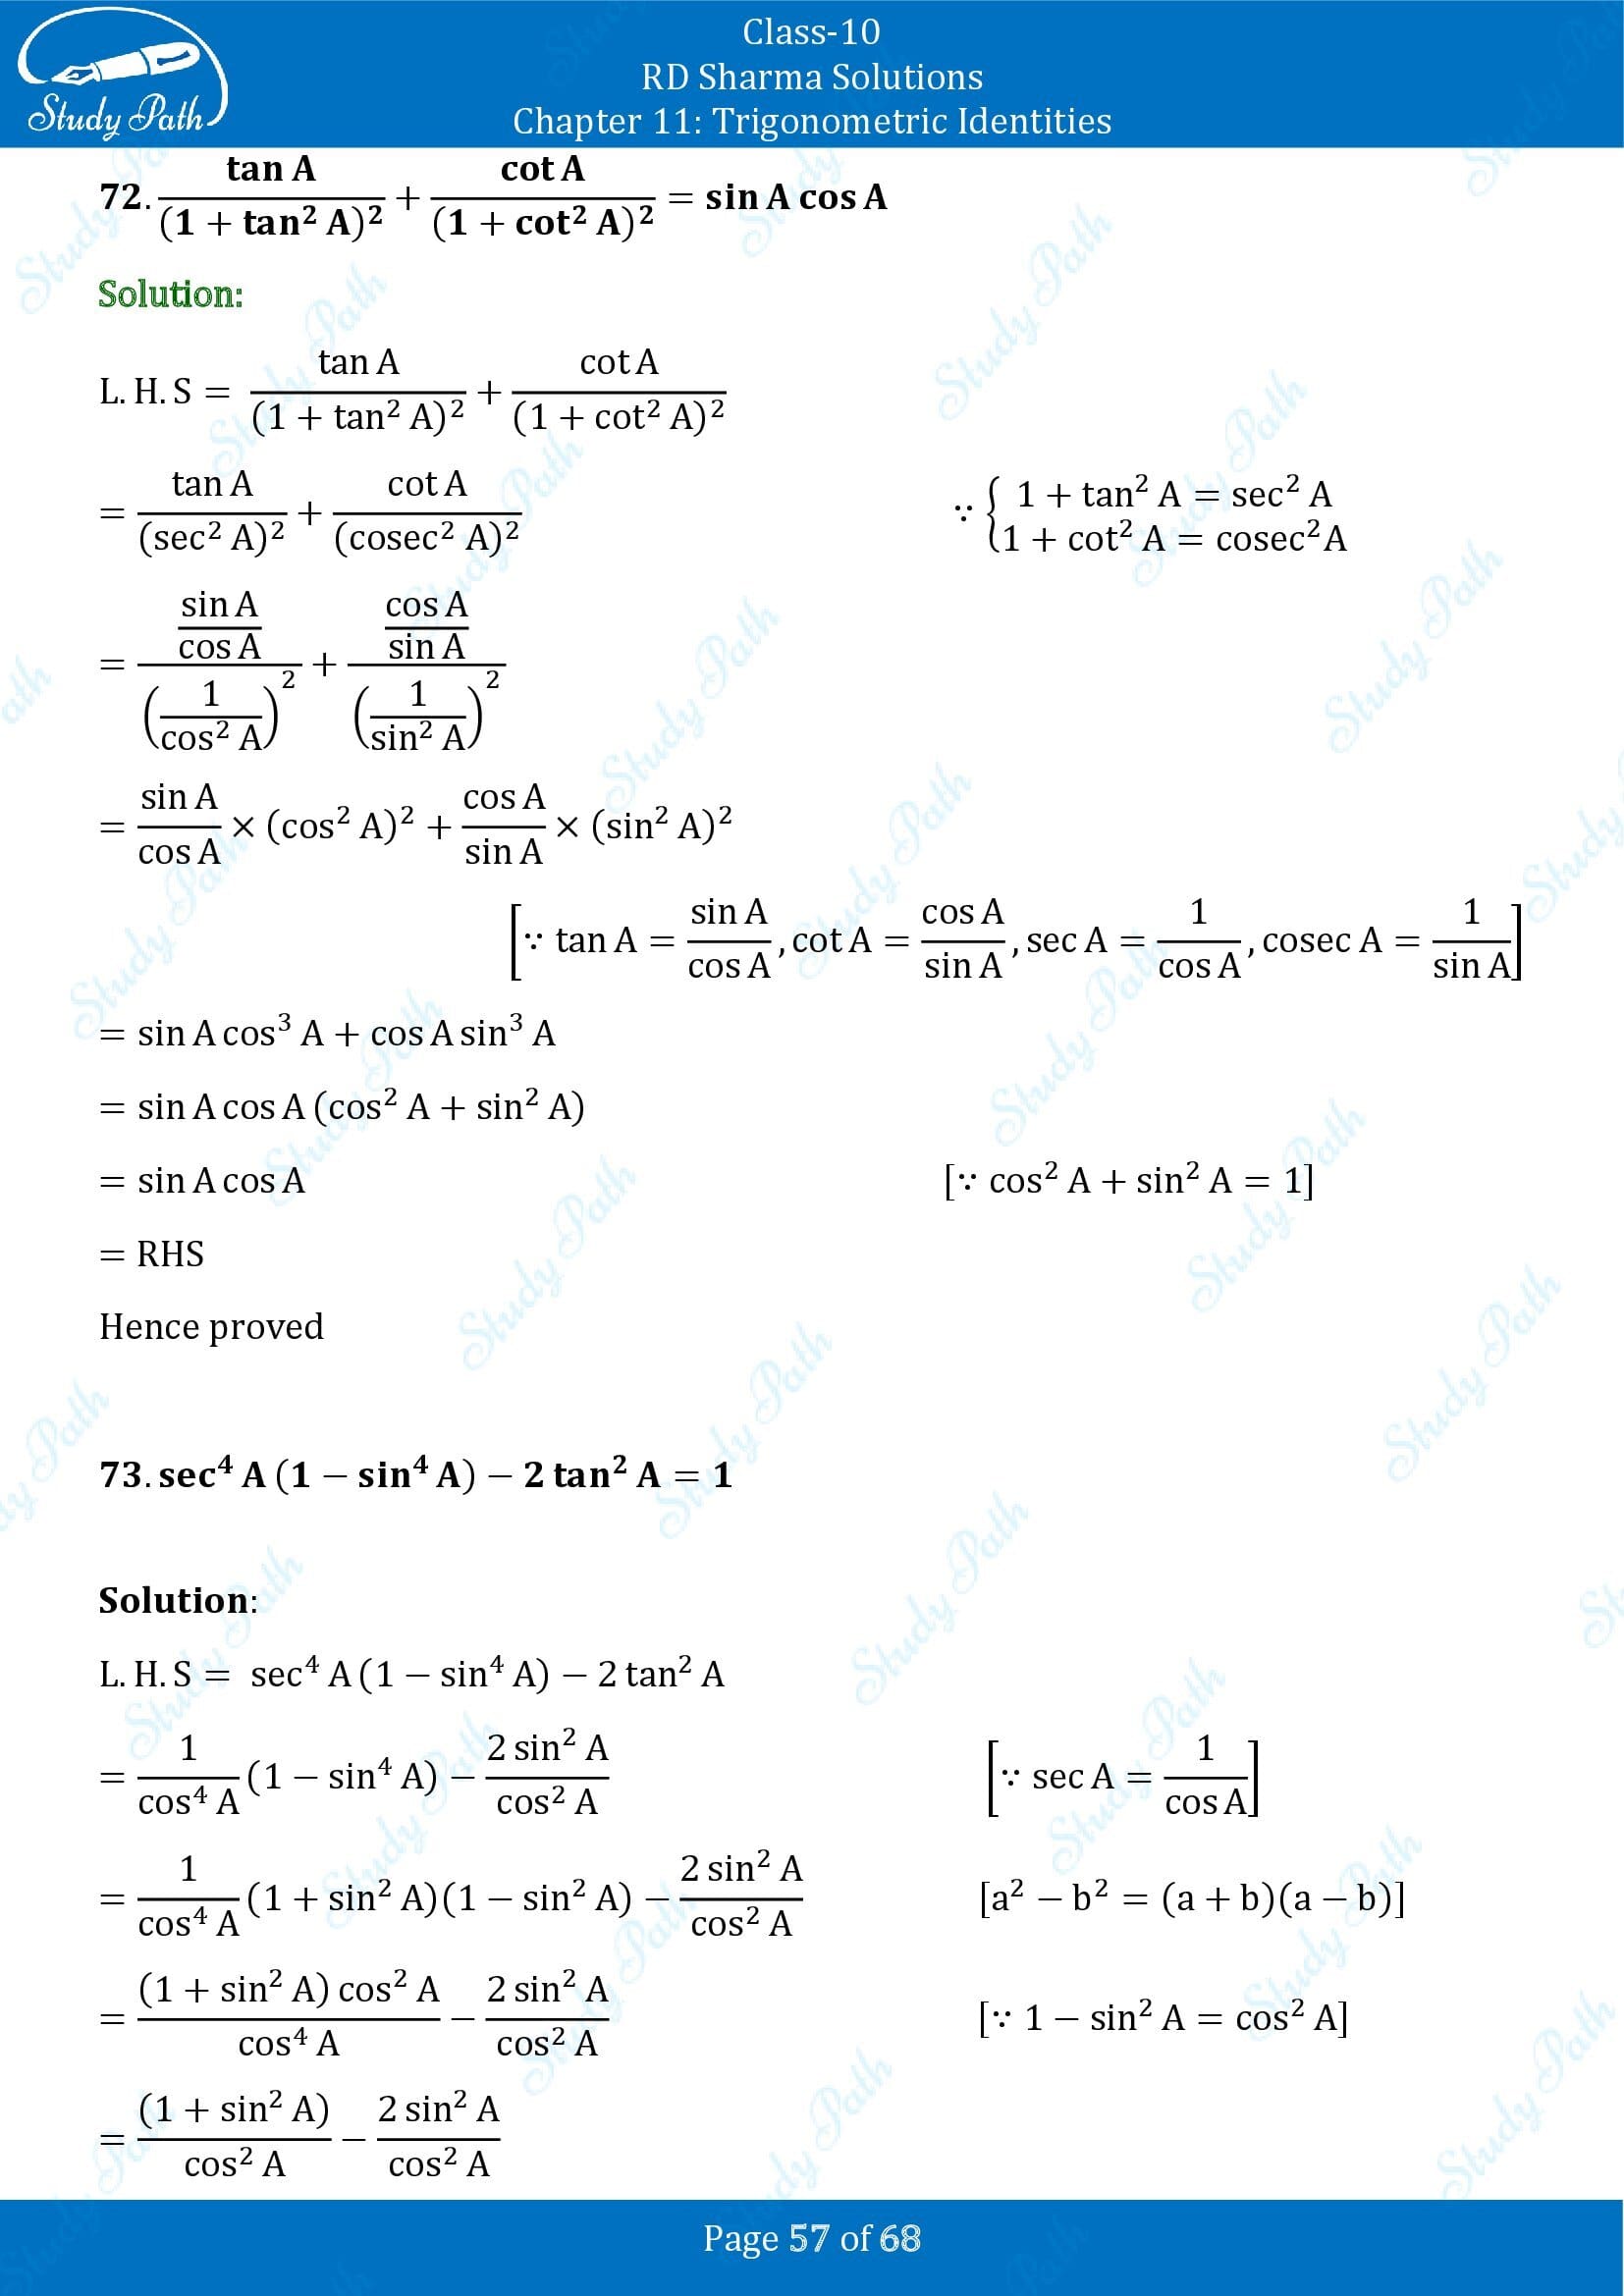 RD Sharma Solutions Class 10 Chapter 11 Trigonometric Identities Exercise 11.1 00057